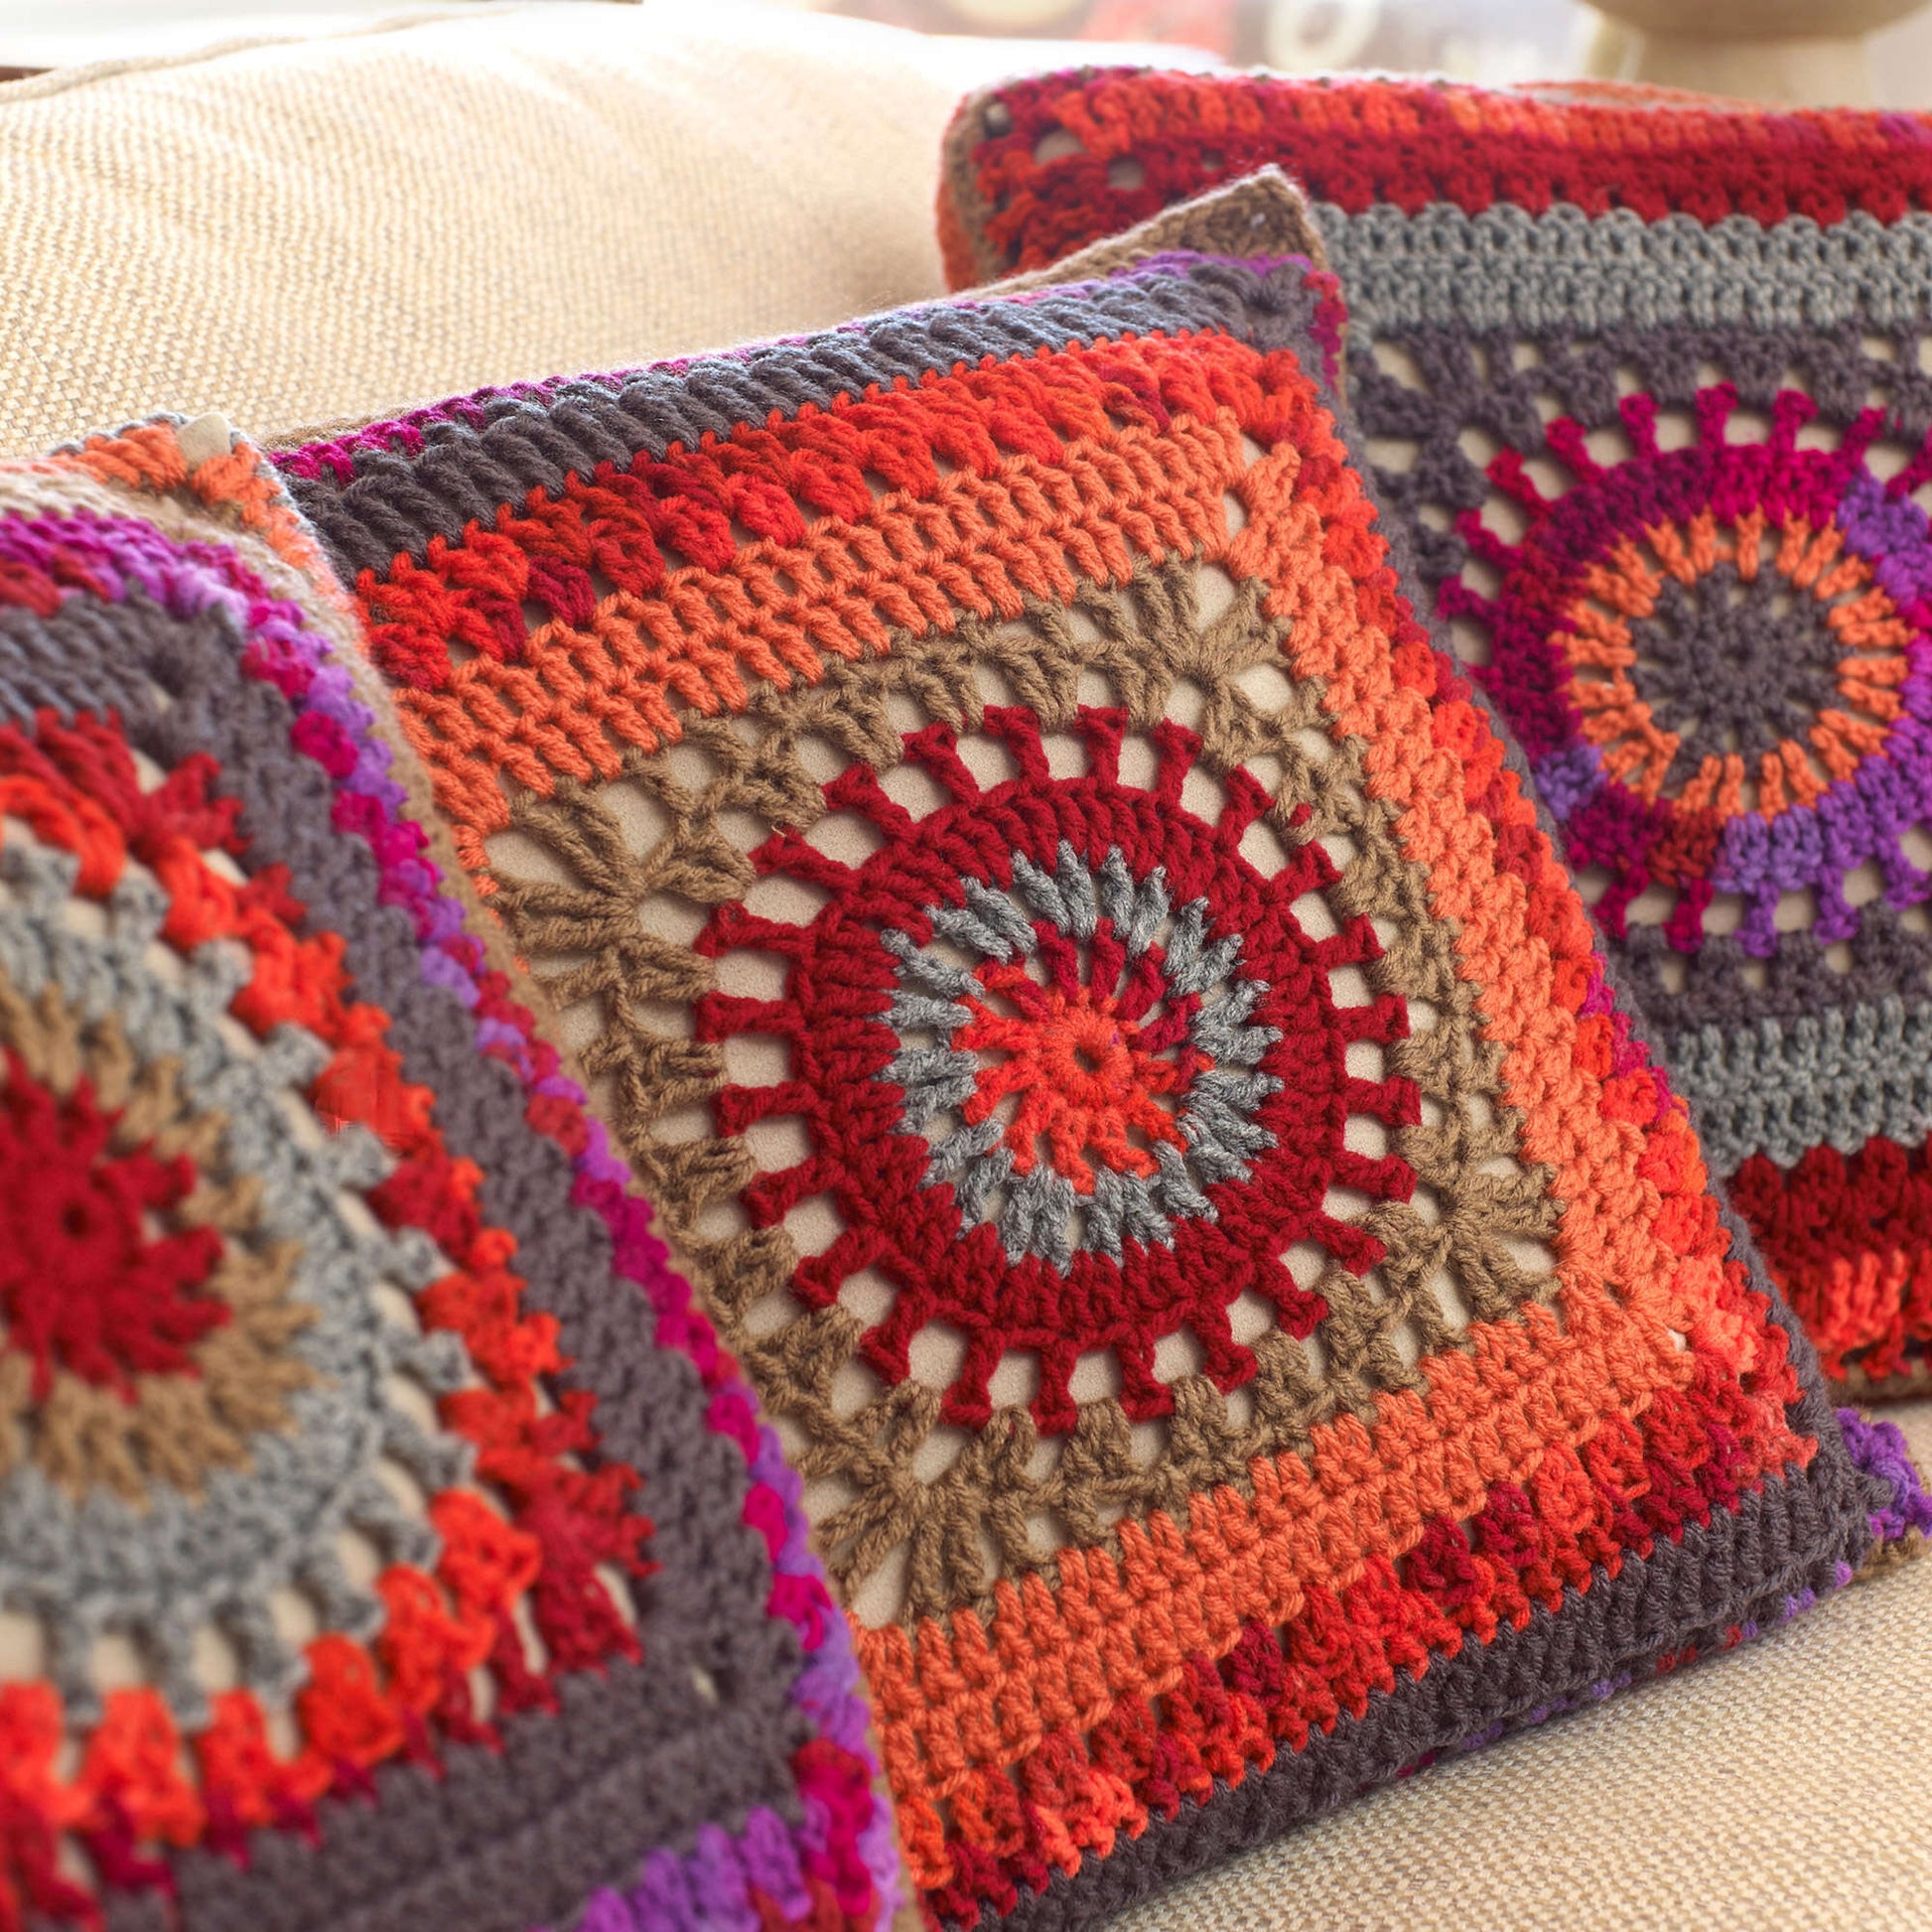 Free Red Heart Circle In The Square Pillows Crochet Pattern